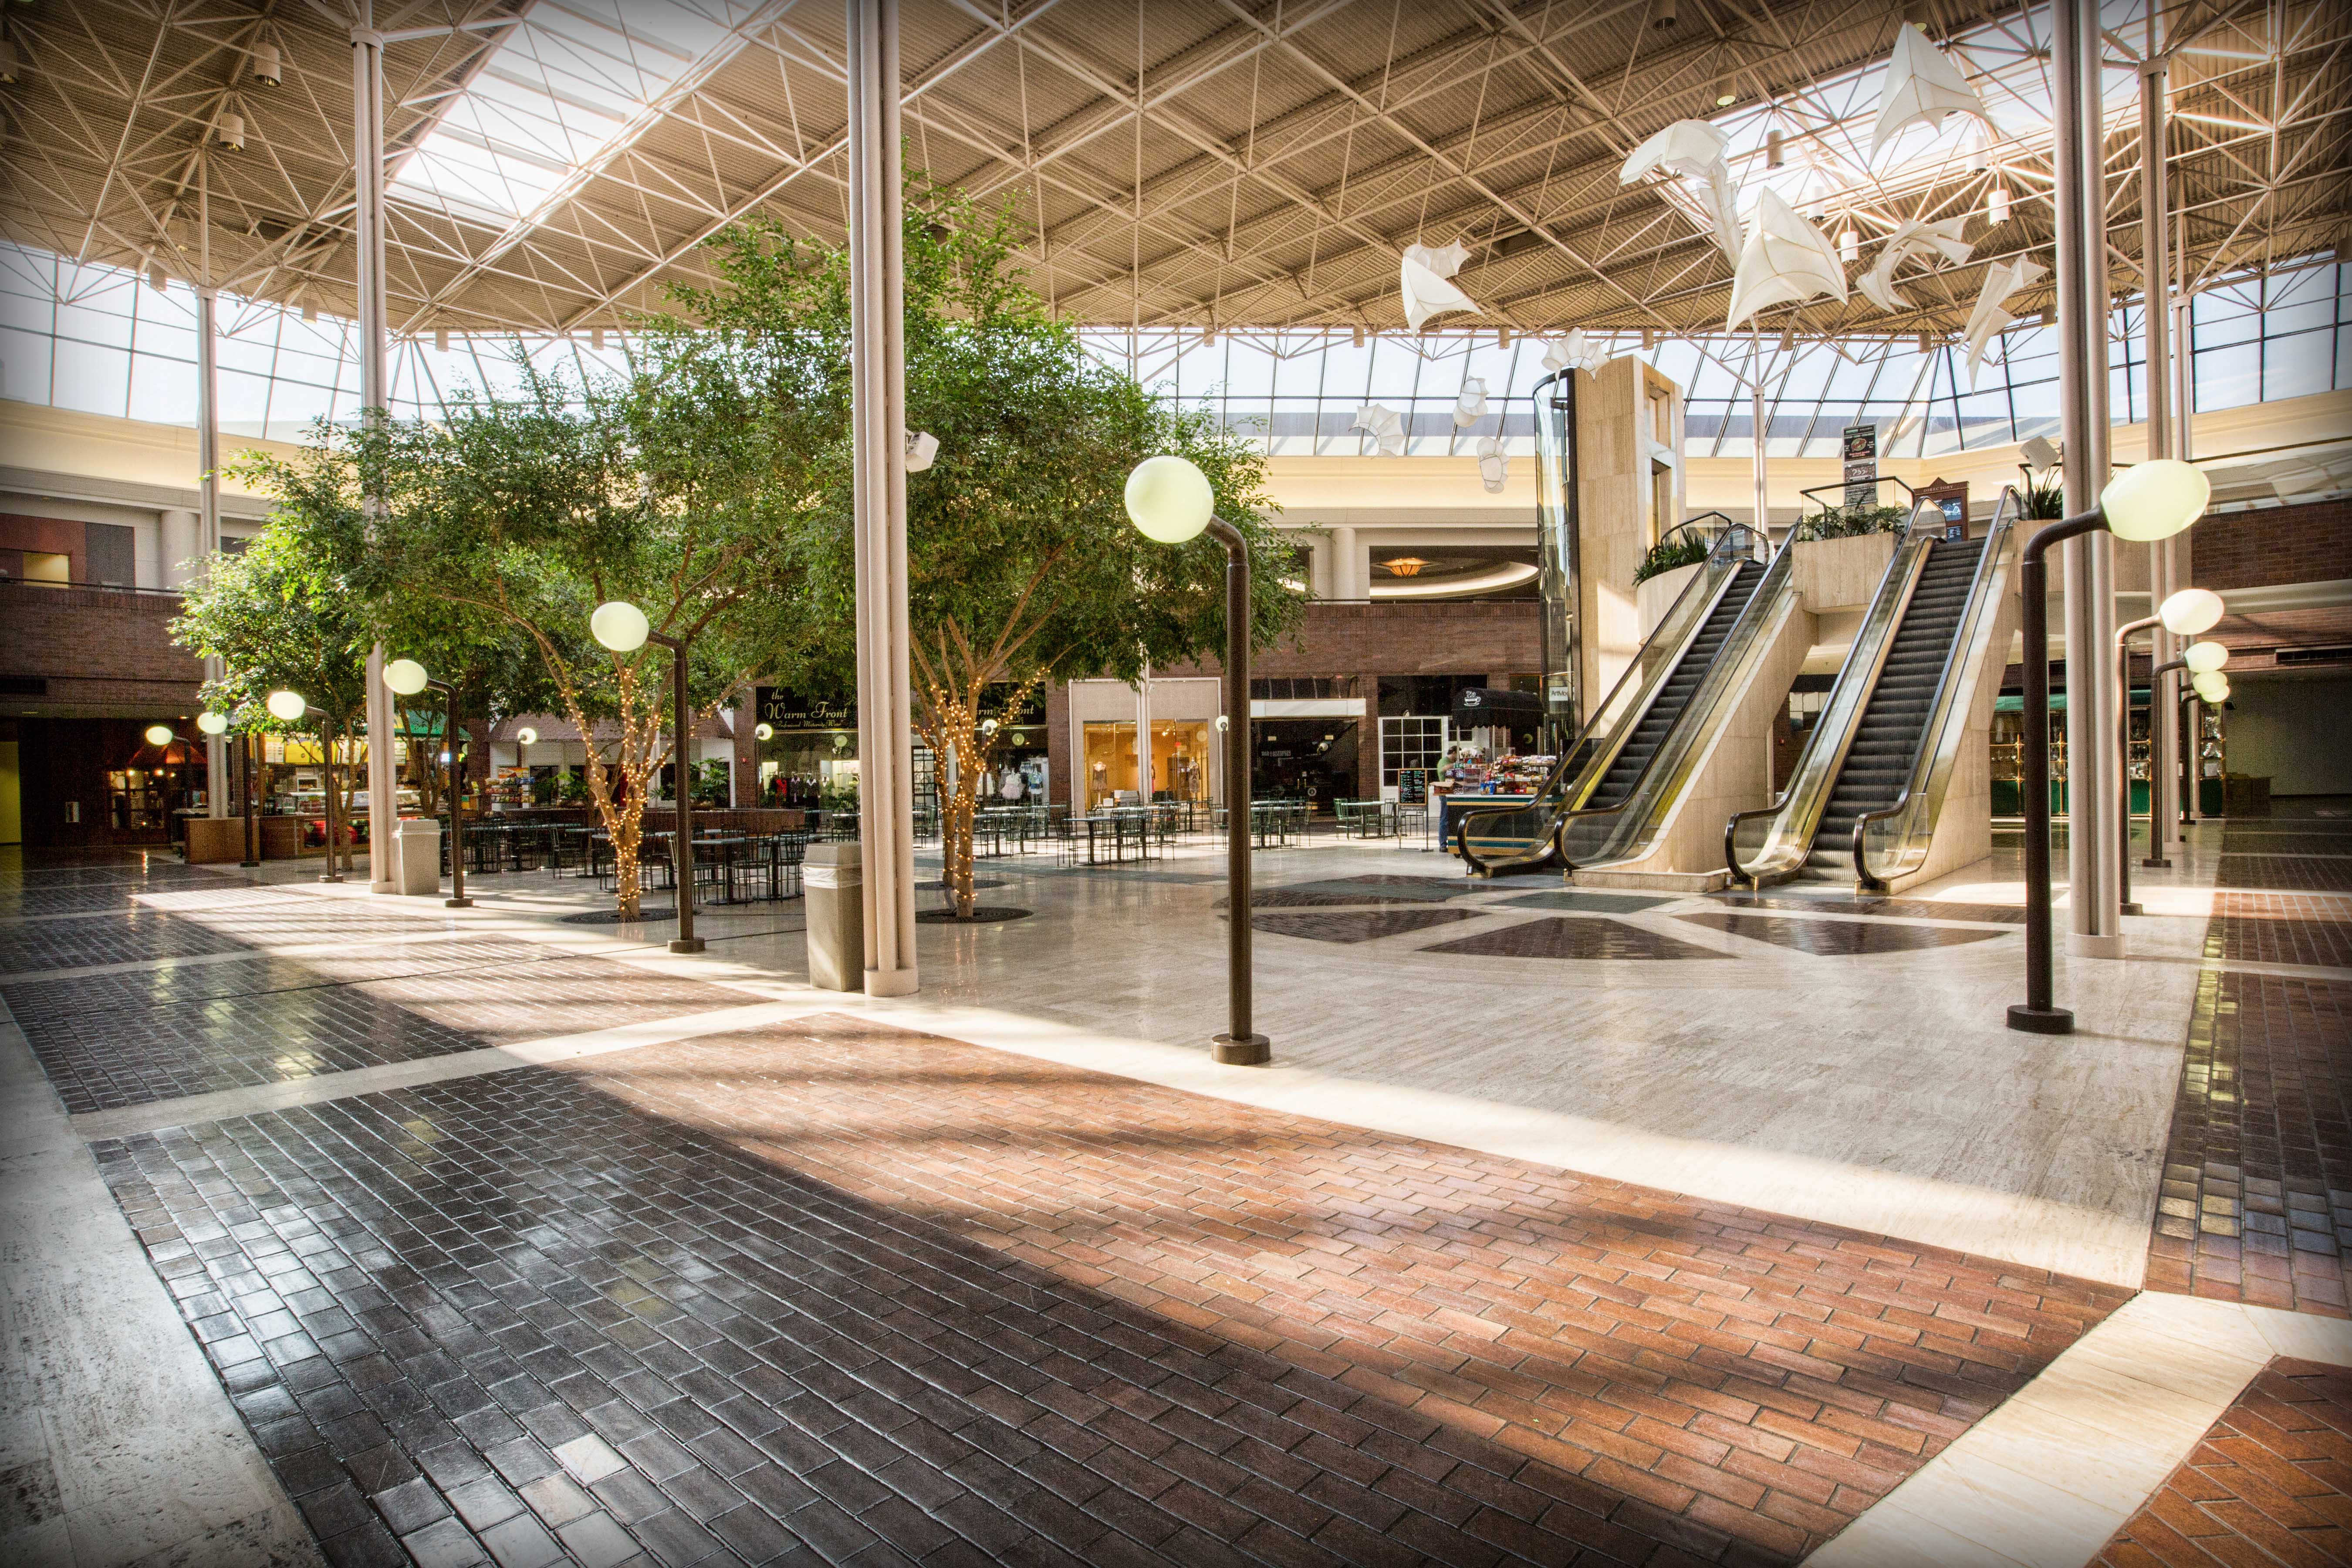 Cumberland Mall and Unique Shopping at the Cobb Galleria Centre